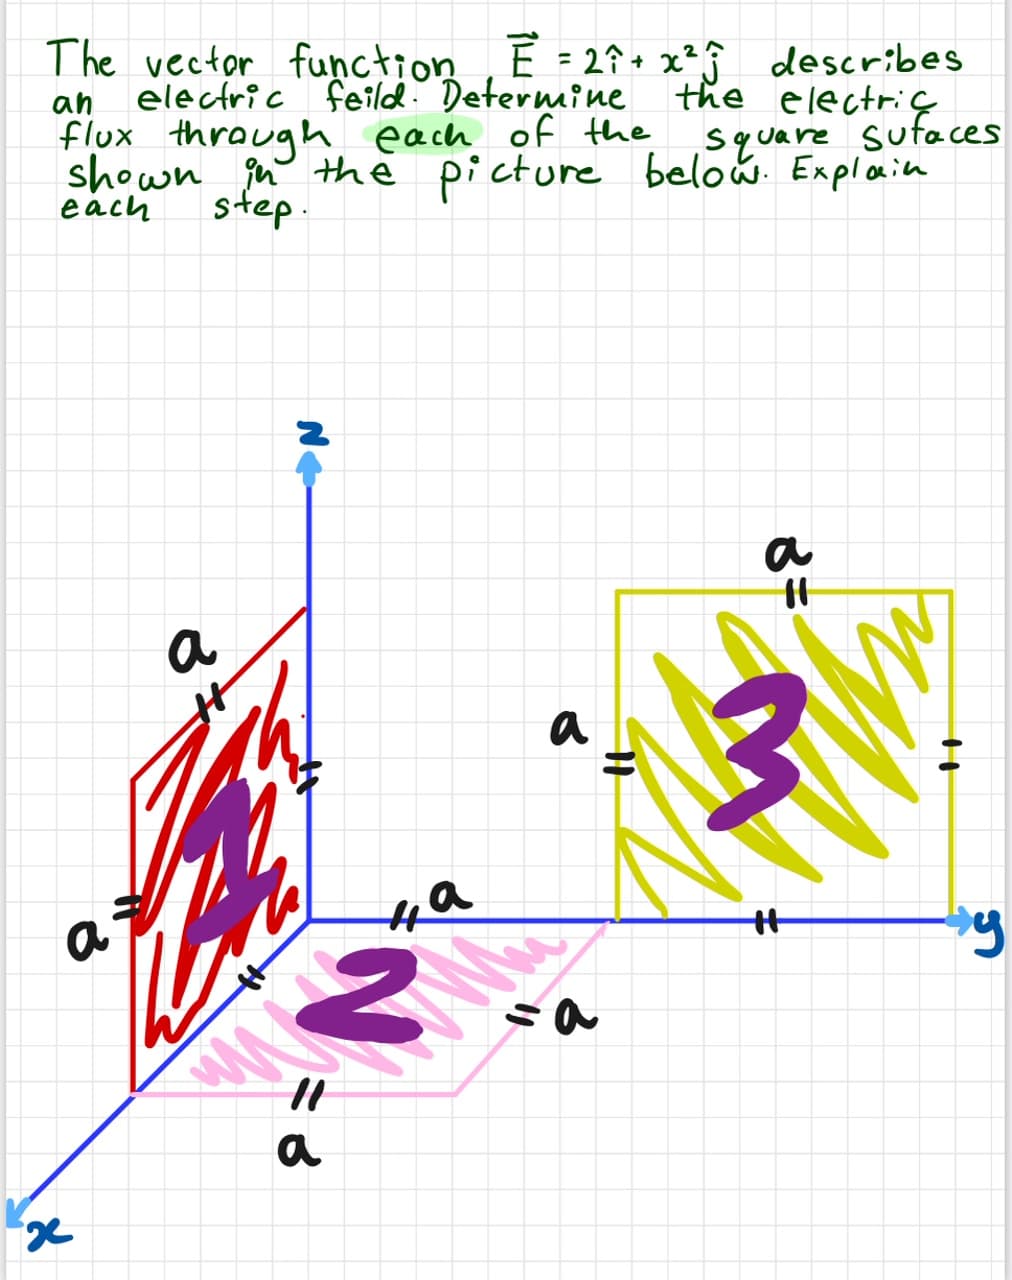 The vector function E = 2₁ + x² ĵ
an electric feild. Determine
the
Square Sufaces
flux through each of the
shown in the picture below. Explain
step.
each
a
x
a
L
2
= 6
a
на
a
sa
describes
electric
||
8=
a
M
H
by